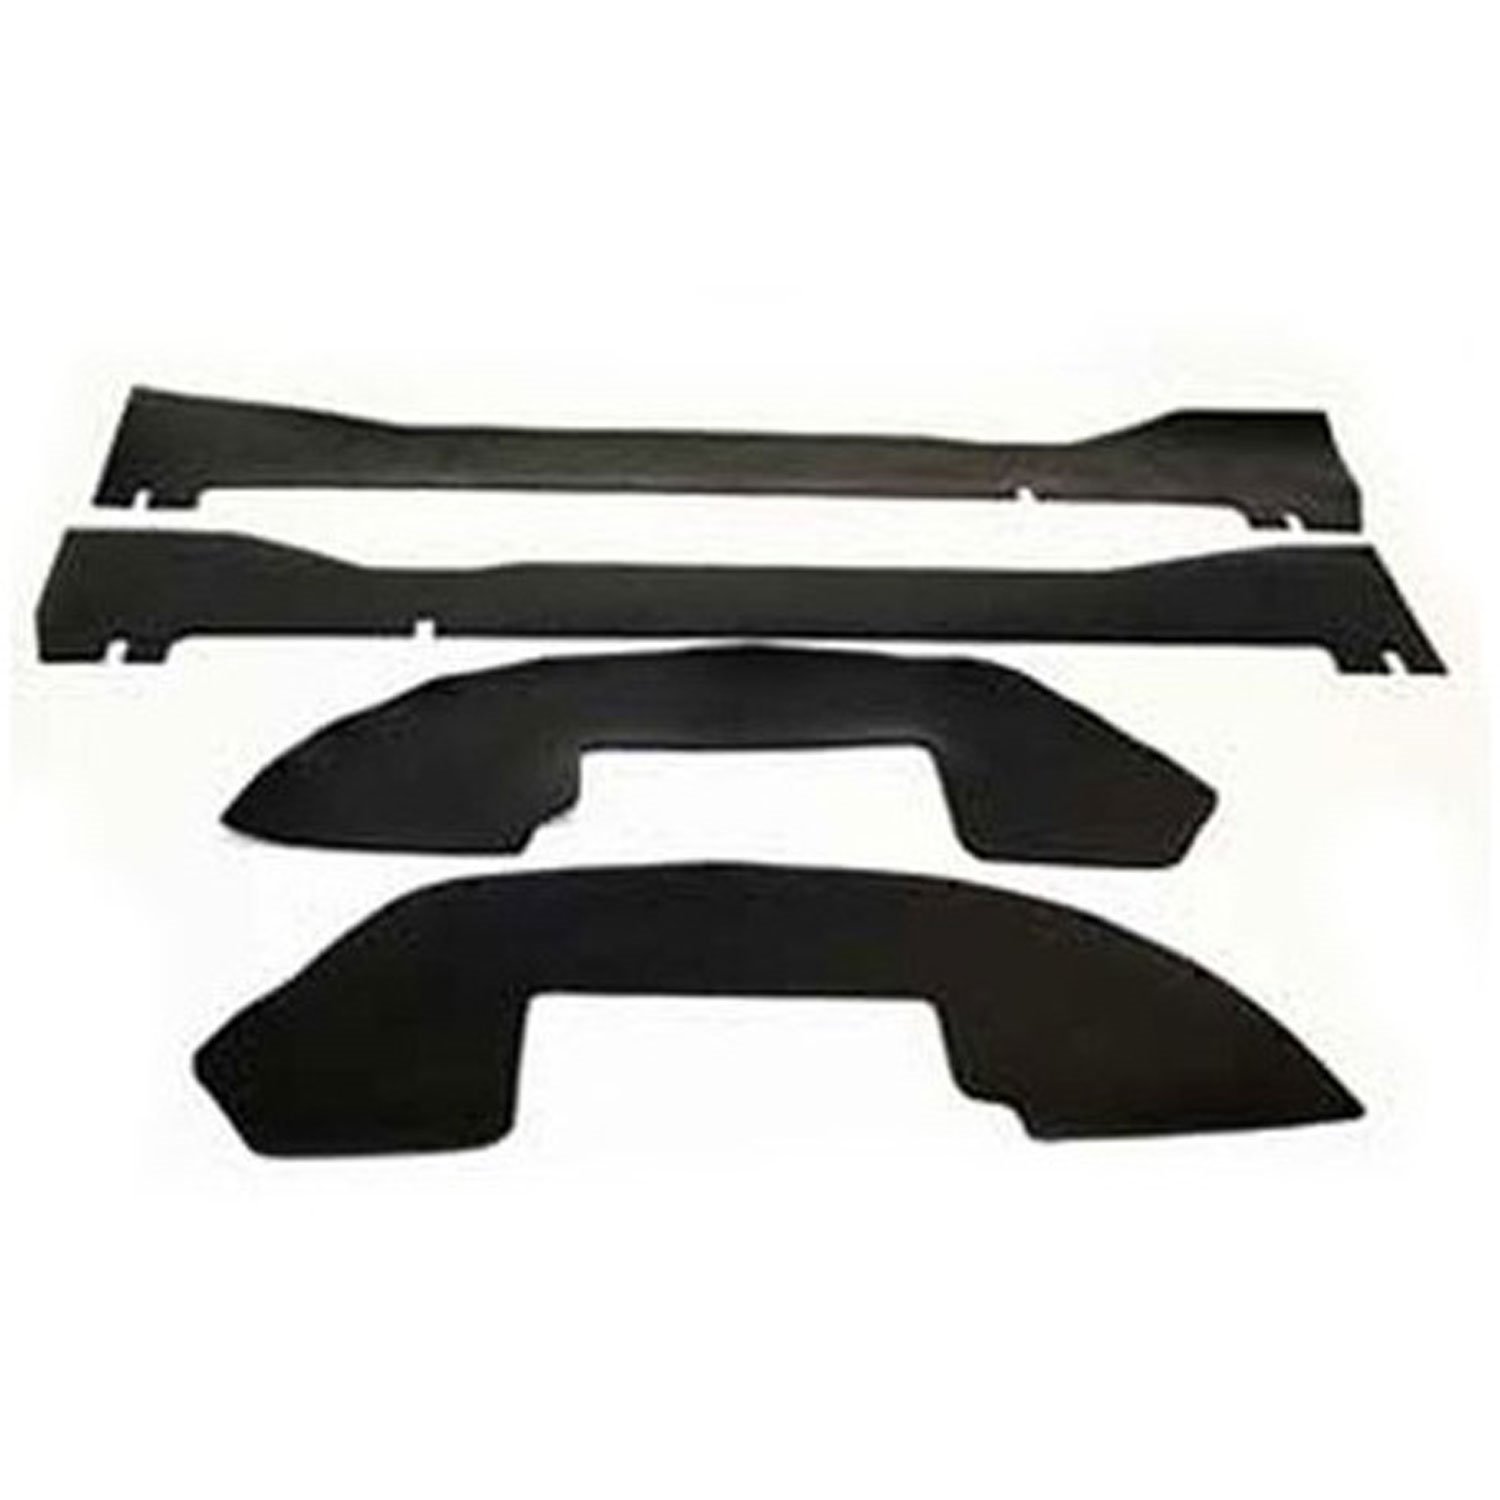 Wheel Well Gap Guard Kit for 2004-2014 Ford F-150